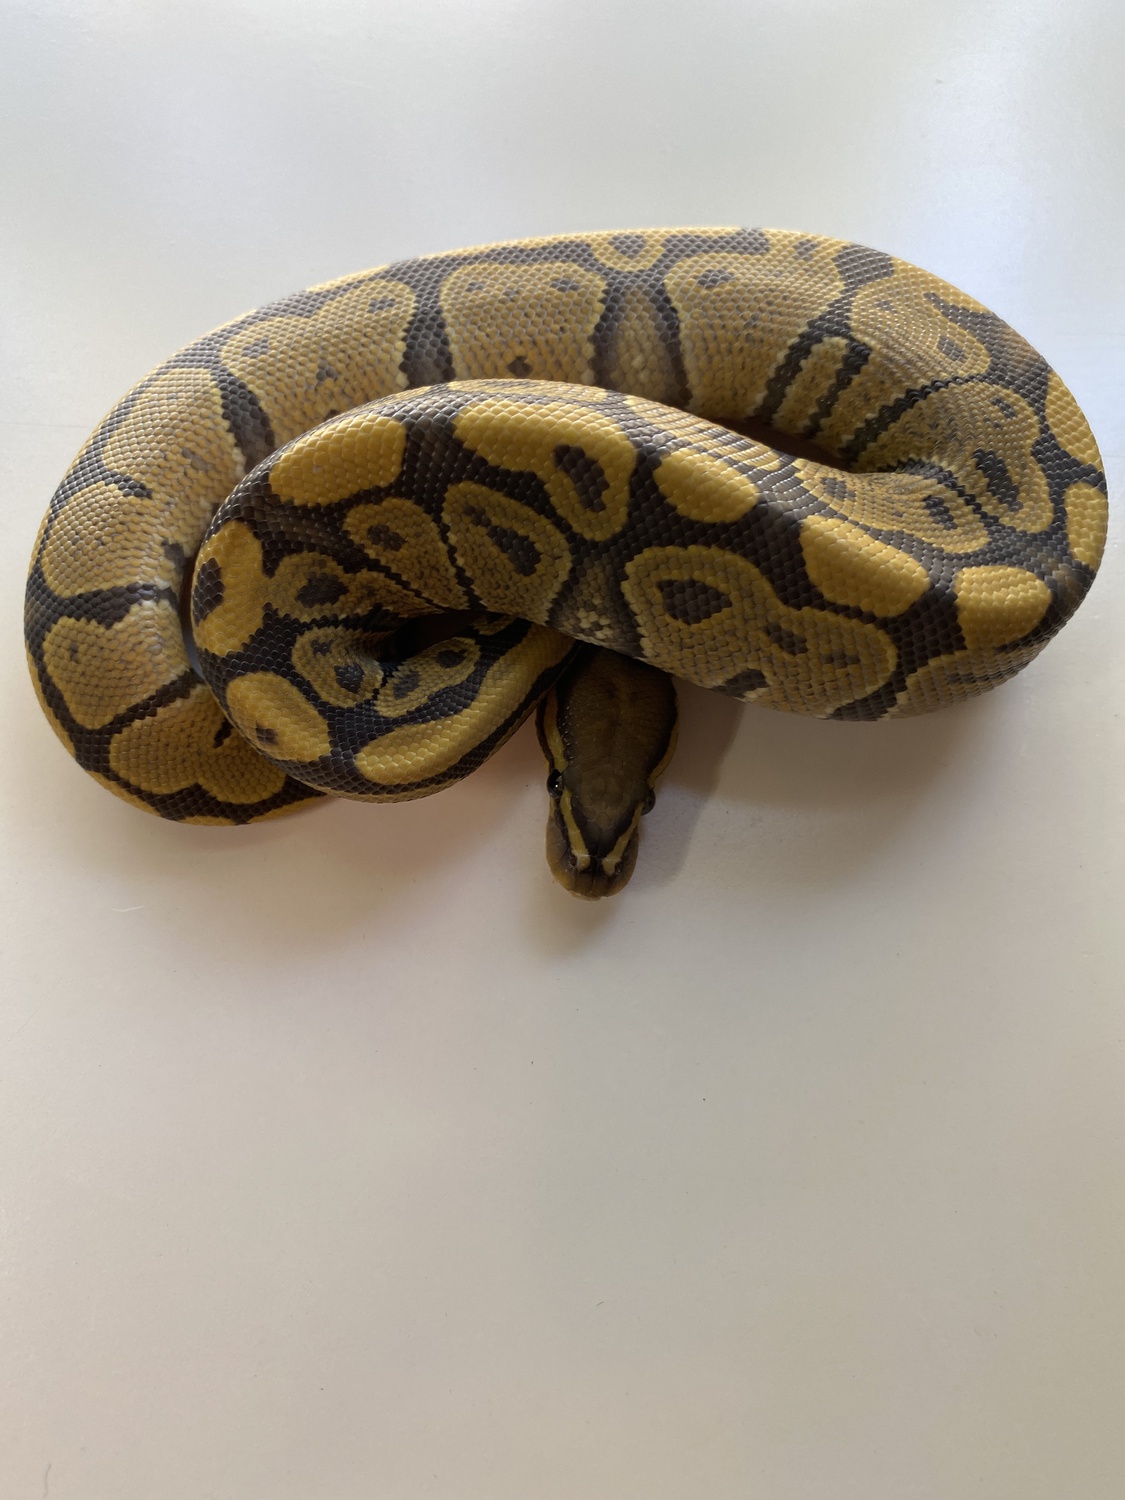 Orange Ghost Ball Python by Bogue Banks Reptiles